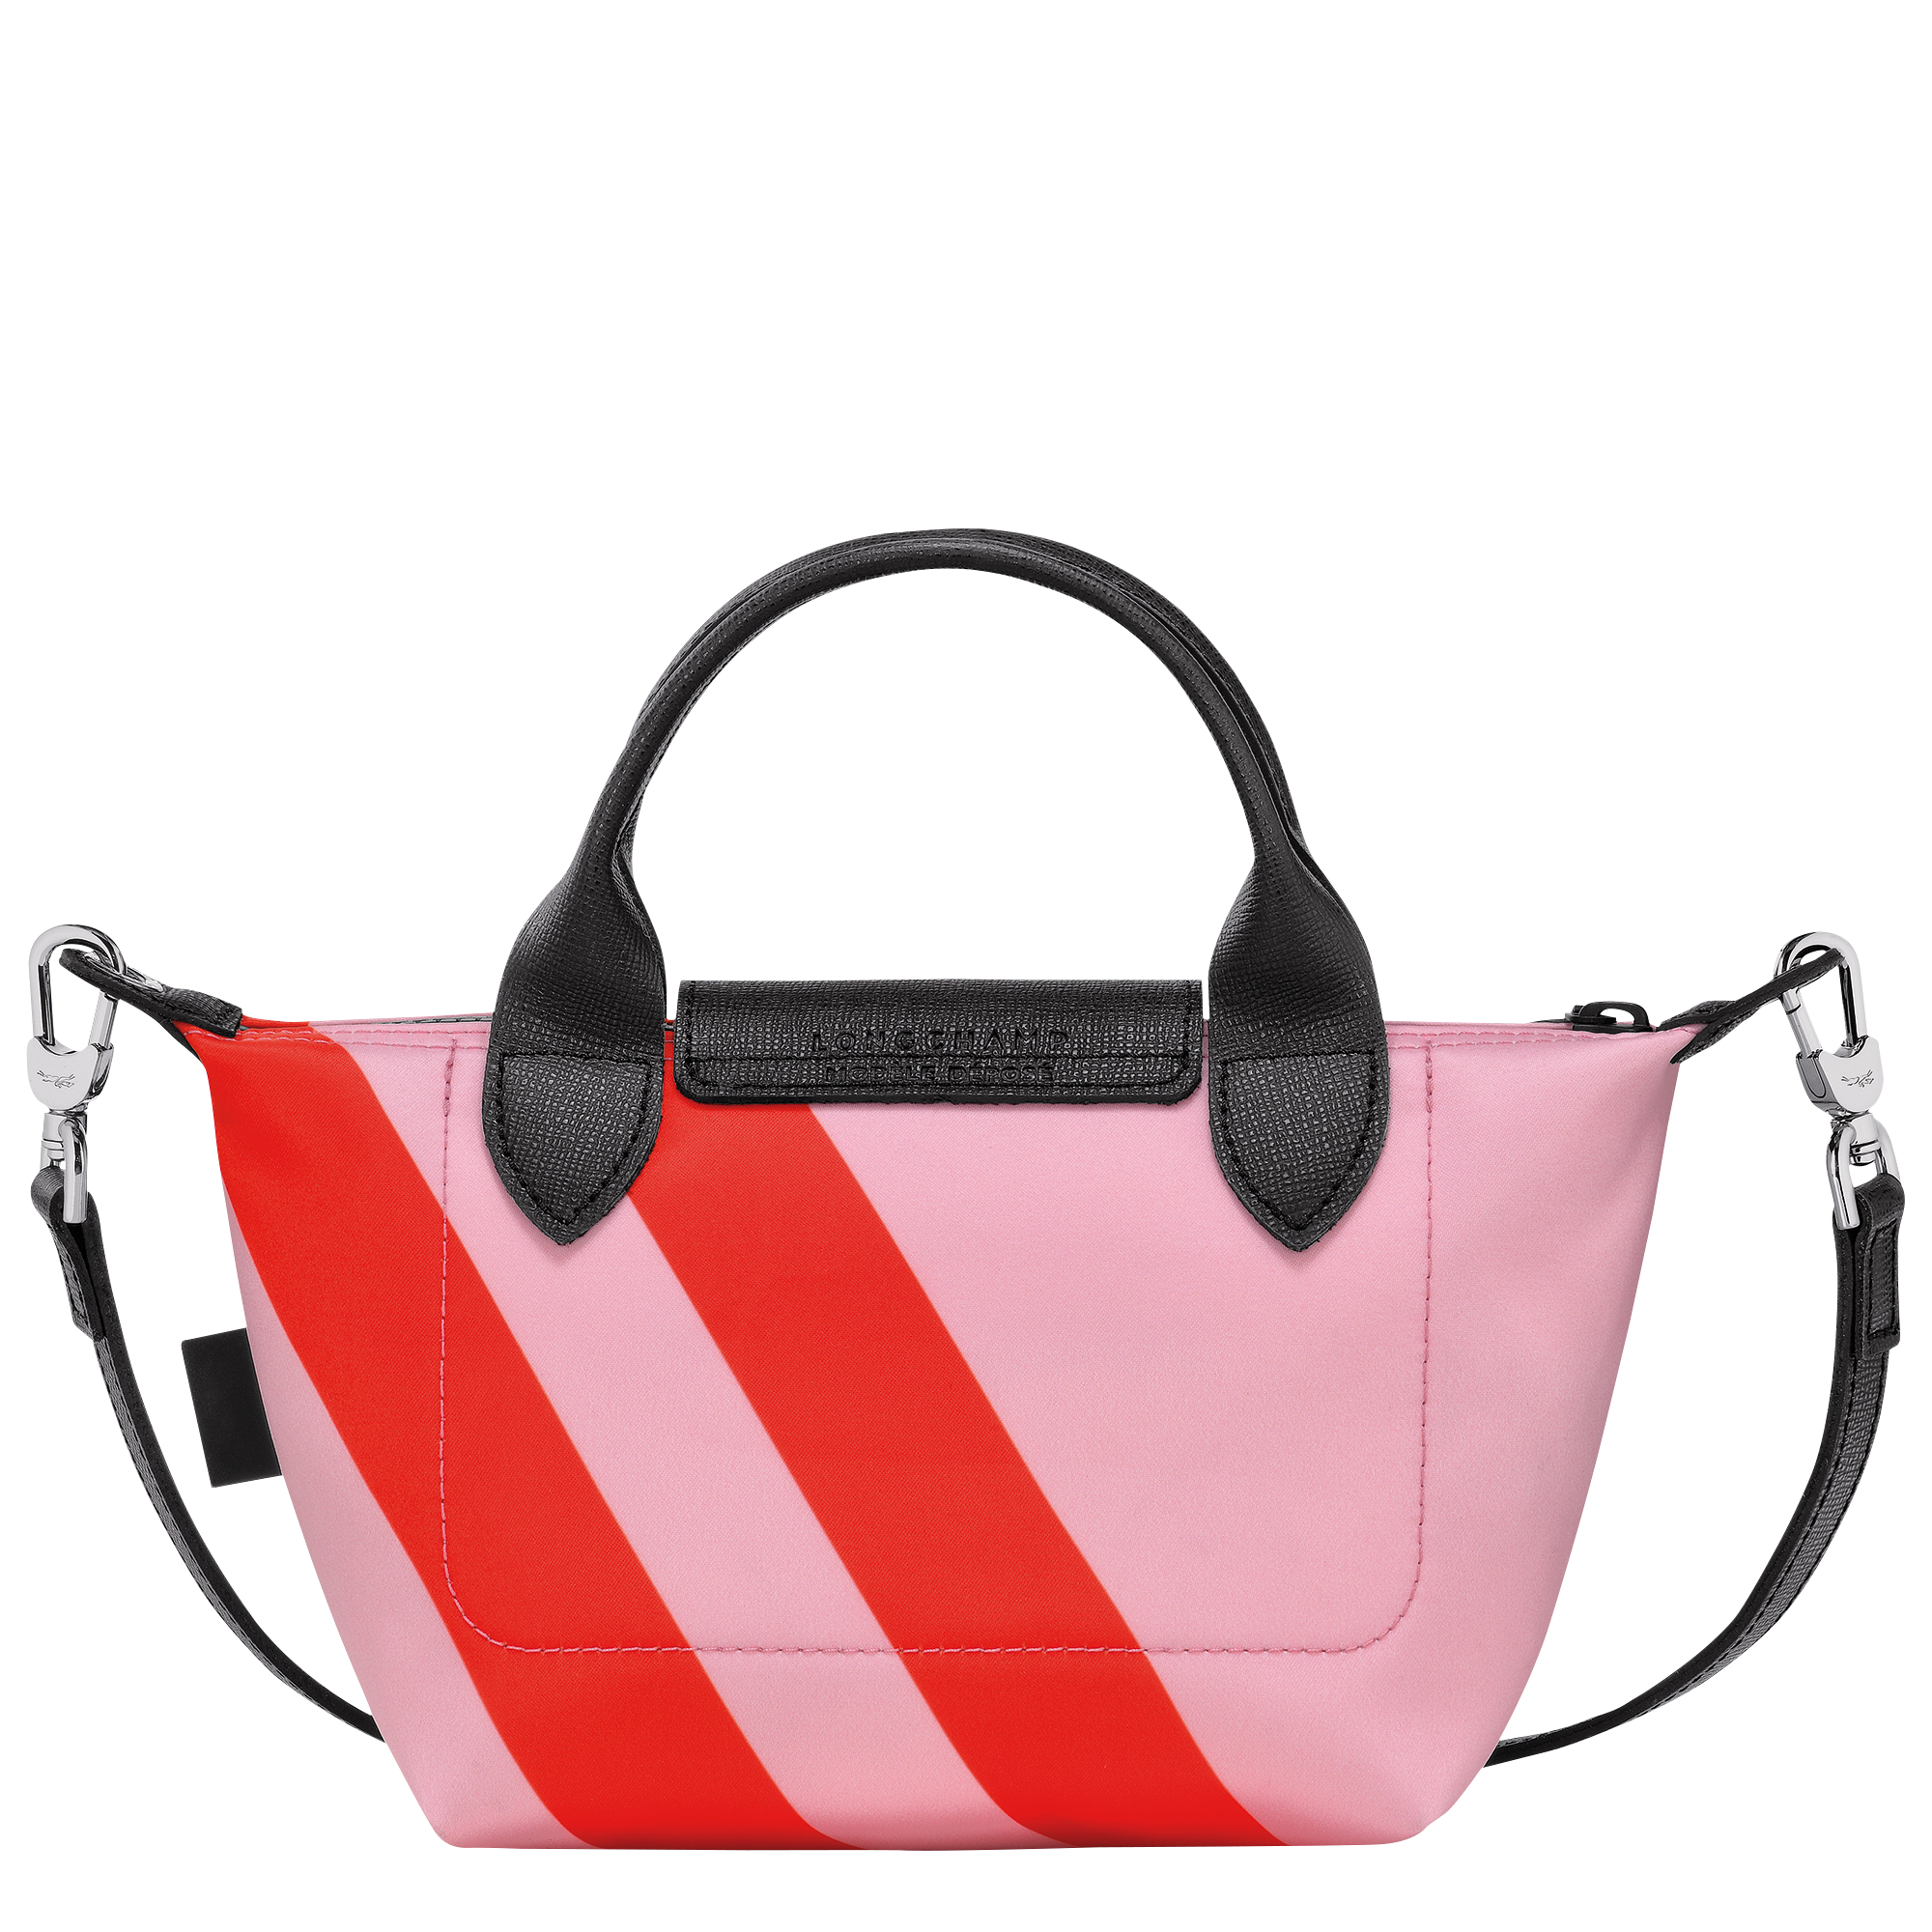 Longchamp Le Pliage Cuir Xs Top Handle Bag in Red